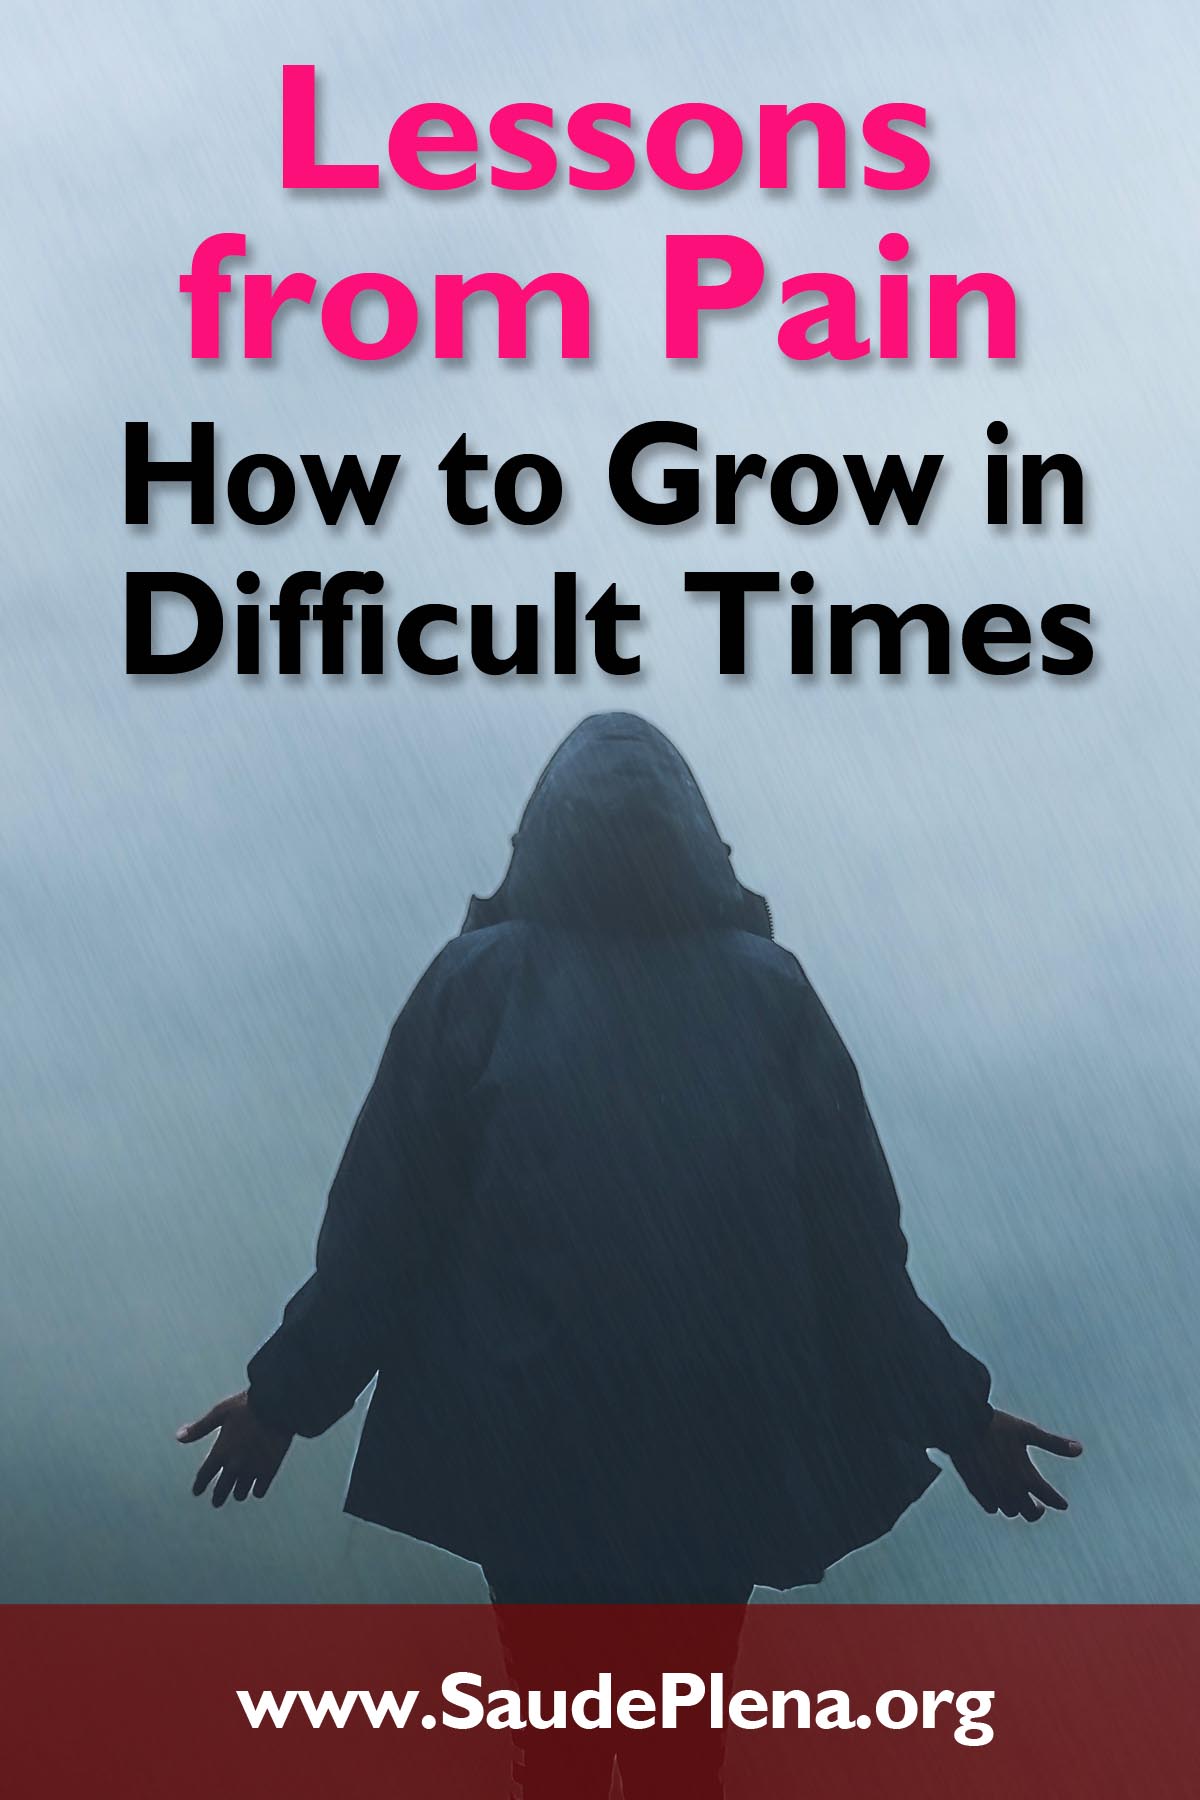 Lessons from Pain - How to Grow in Difficult Times